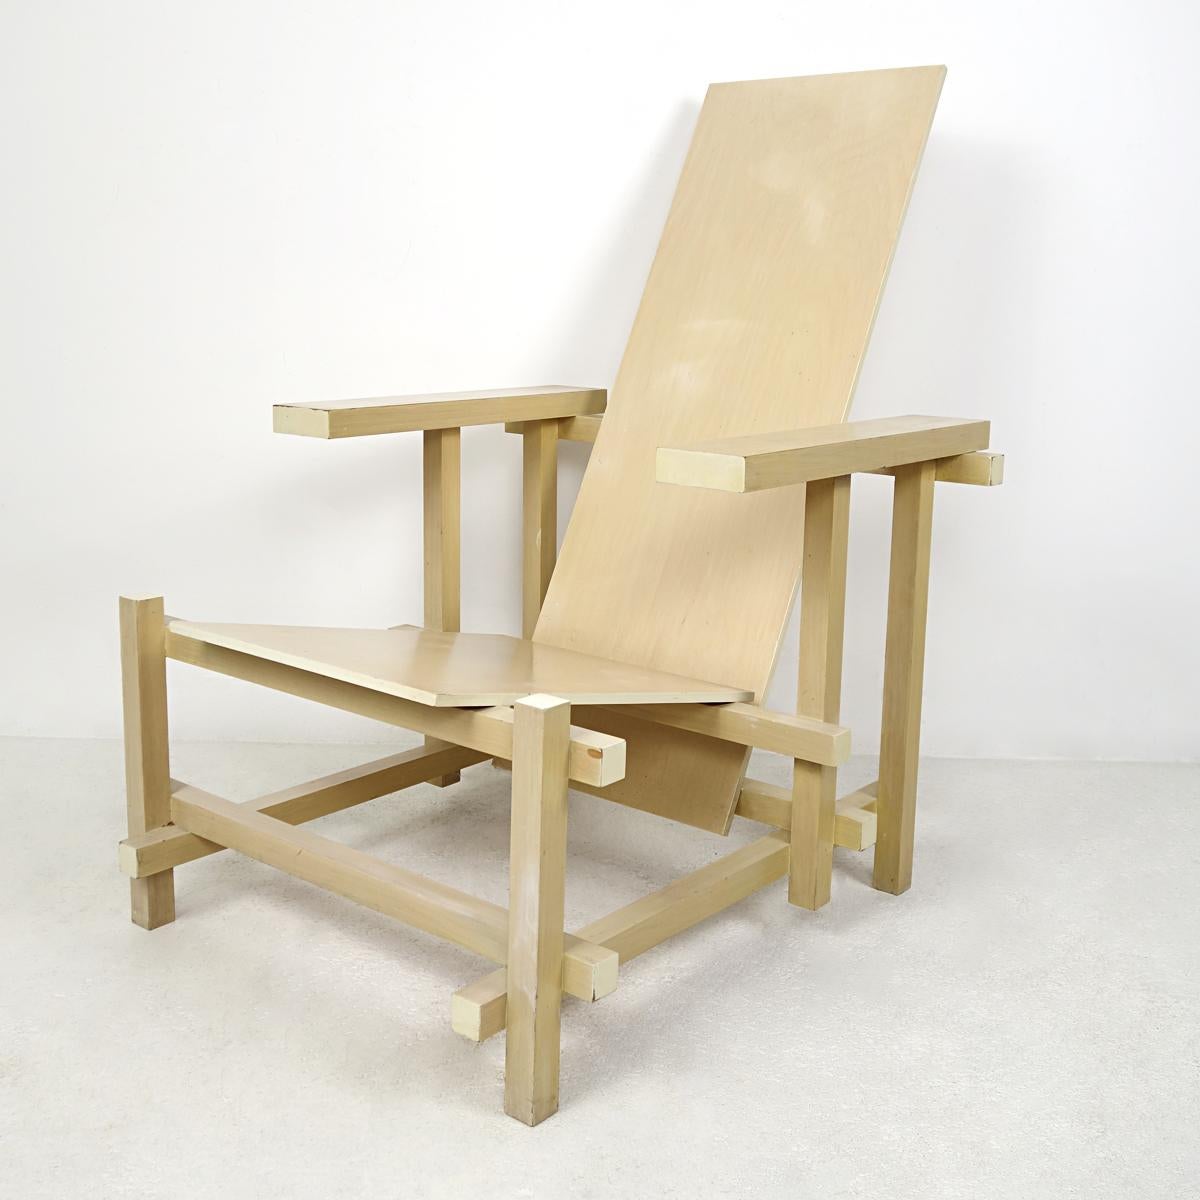 Wonderful hand made edition of the famous Rietveld chair from the estate of Dutch painter Ger Dekker (1943-2020). 
Recently, his work was discovered in Egmond-Binnen, The Netherlands. A true find according to many. His impressive works have a